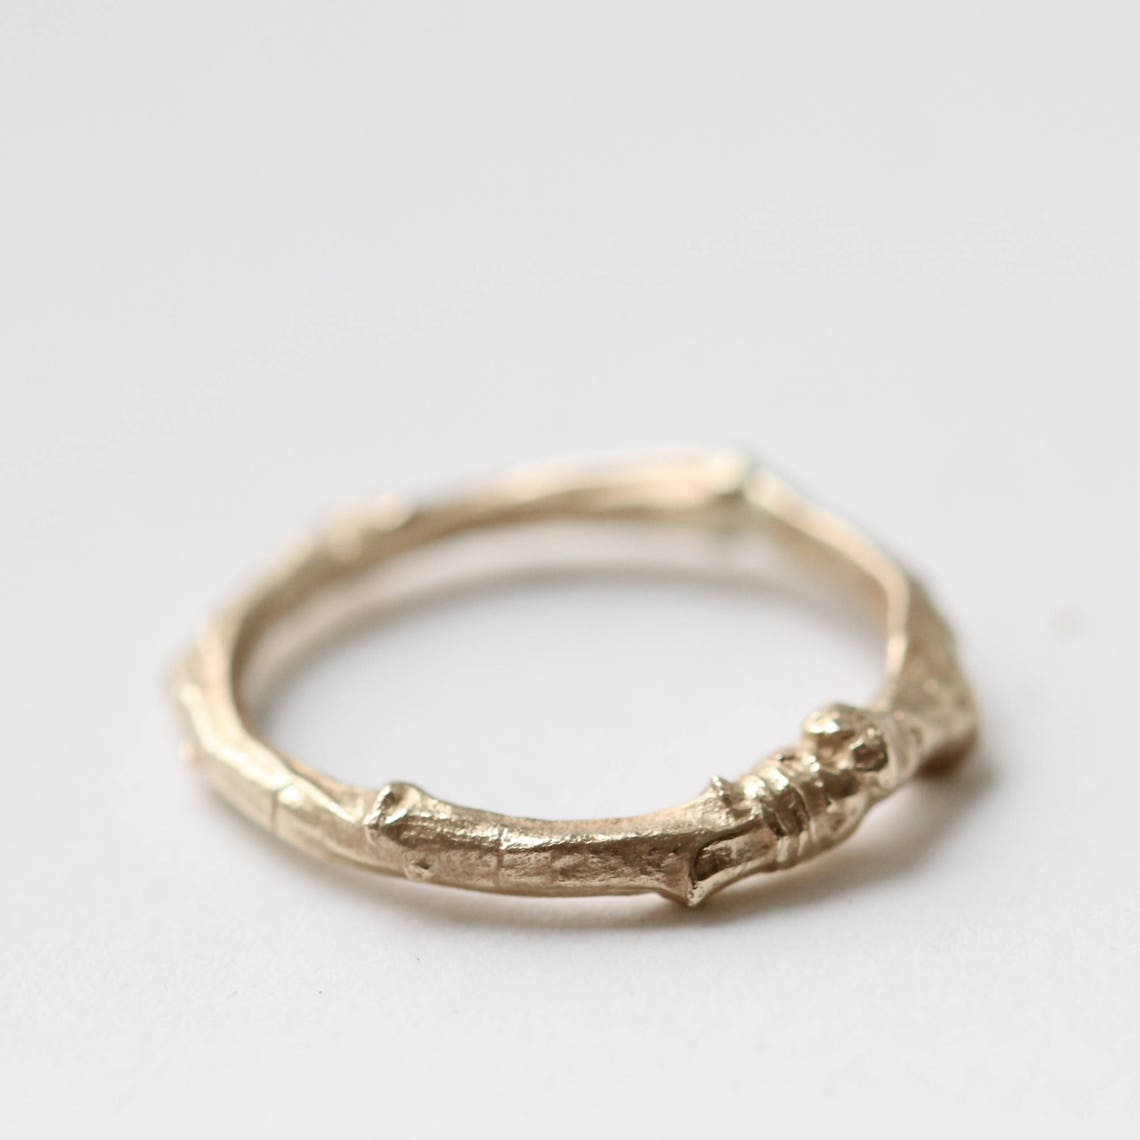 9 carat gold twig ring by Charlotte Bezzant